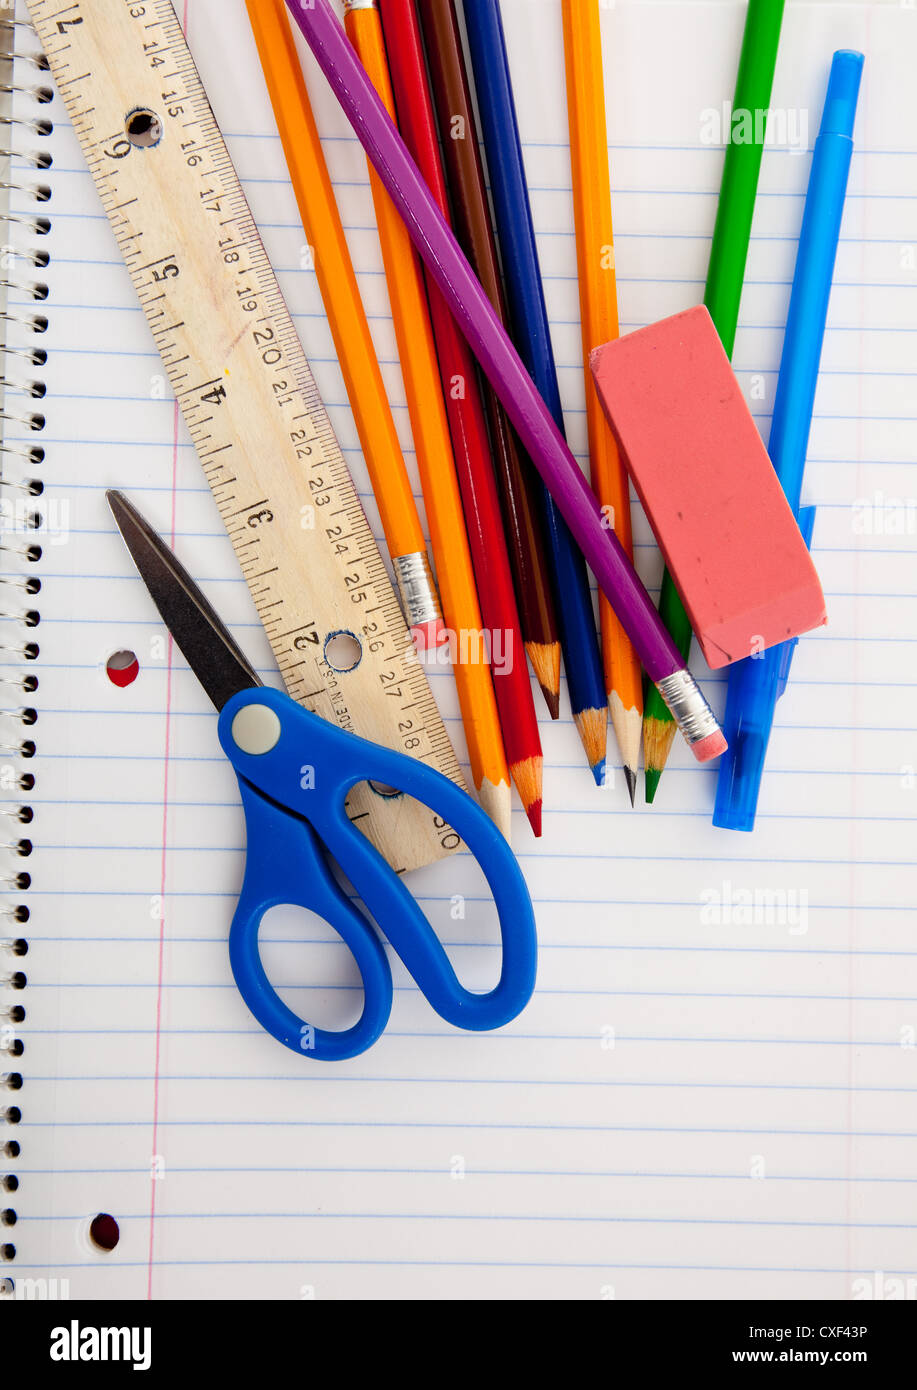 Spiral notebook with pencils and school supplies Stock Photo